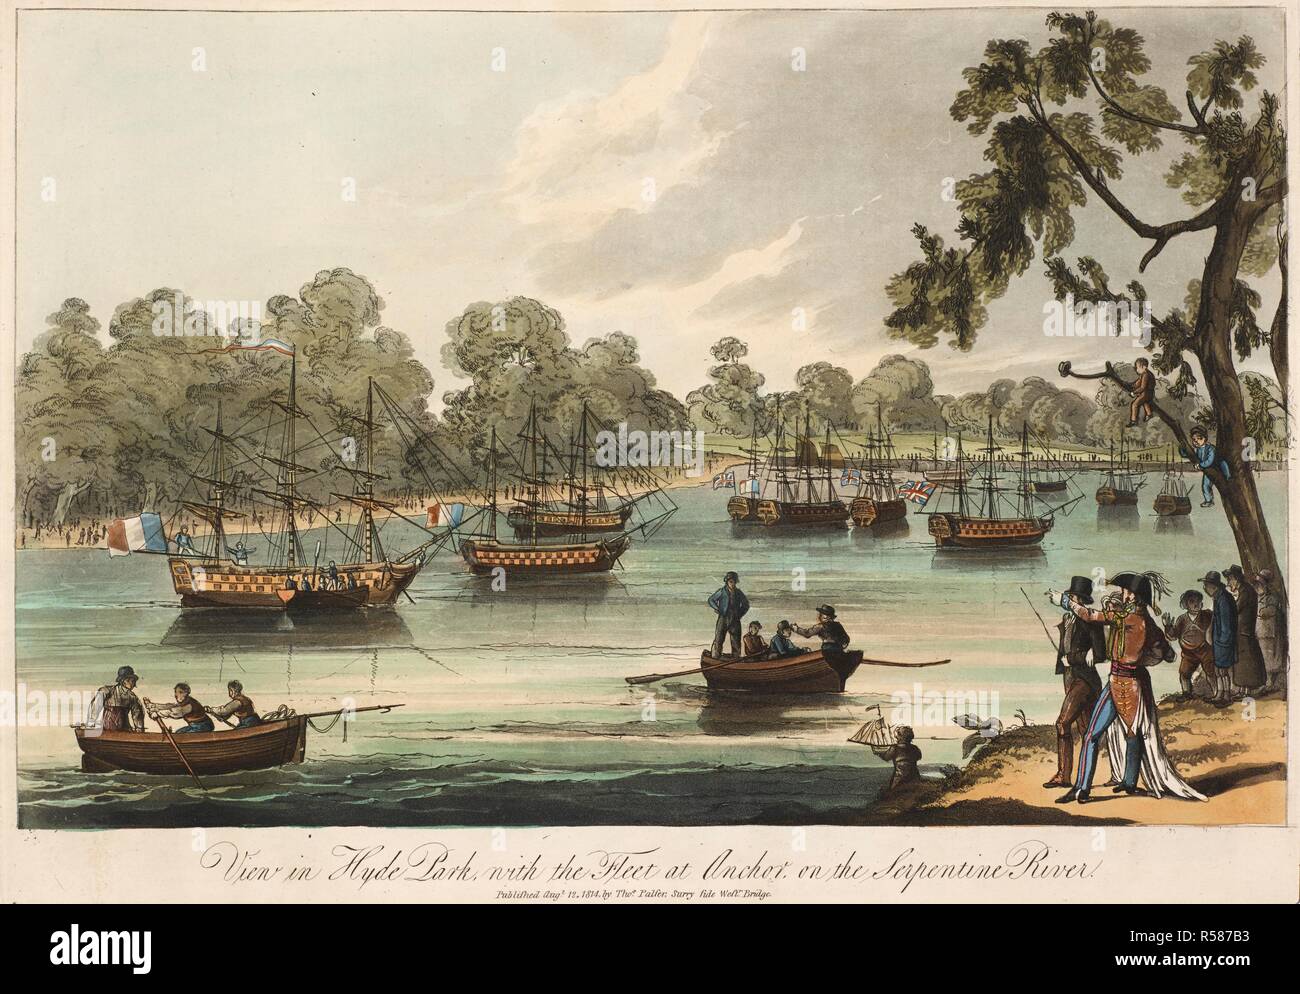 A fleet of ships on the Serpentine River; figures standing on the bank; a small child with a toy ship in the foreground. View in Hyde Park, with the Fleet at Anchor, on the Serpentine River. [London] : Published Augt 12, 1814, by Thos Palser, Surry Side West Bridge, [August 12 1814]. Etching and aquatint with hand-colouring. Source: Maps K.Top.26.6.m. Language: English. Stock Photo